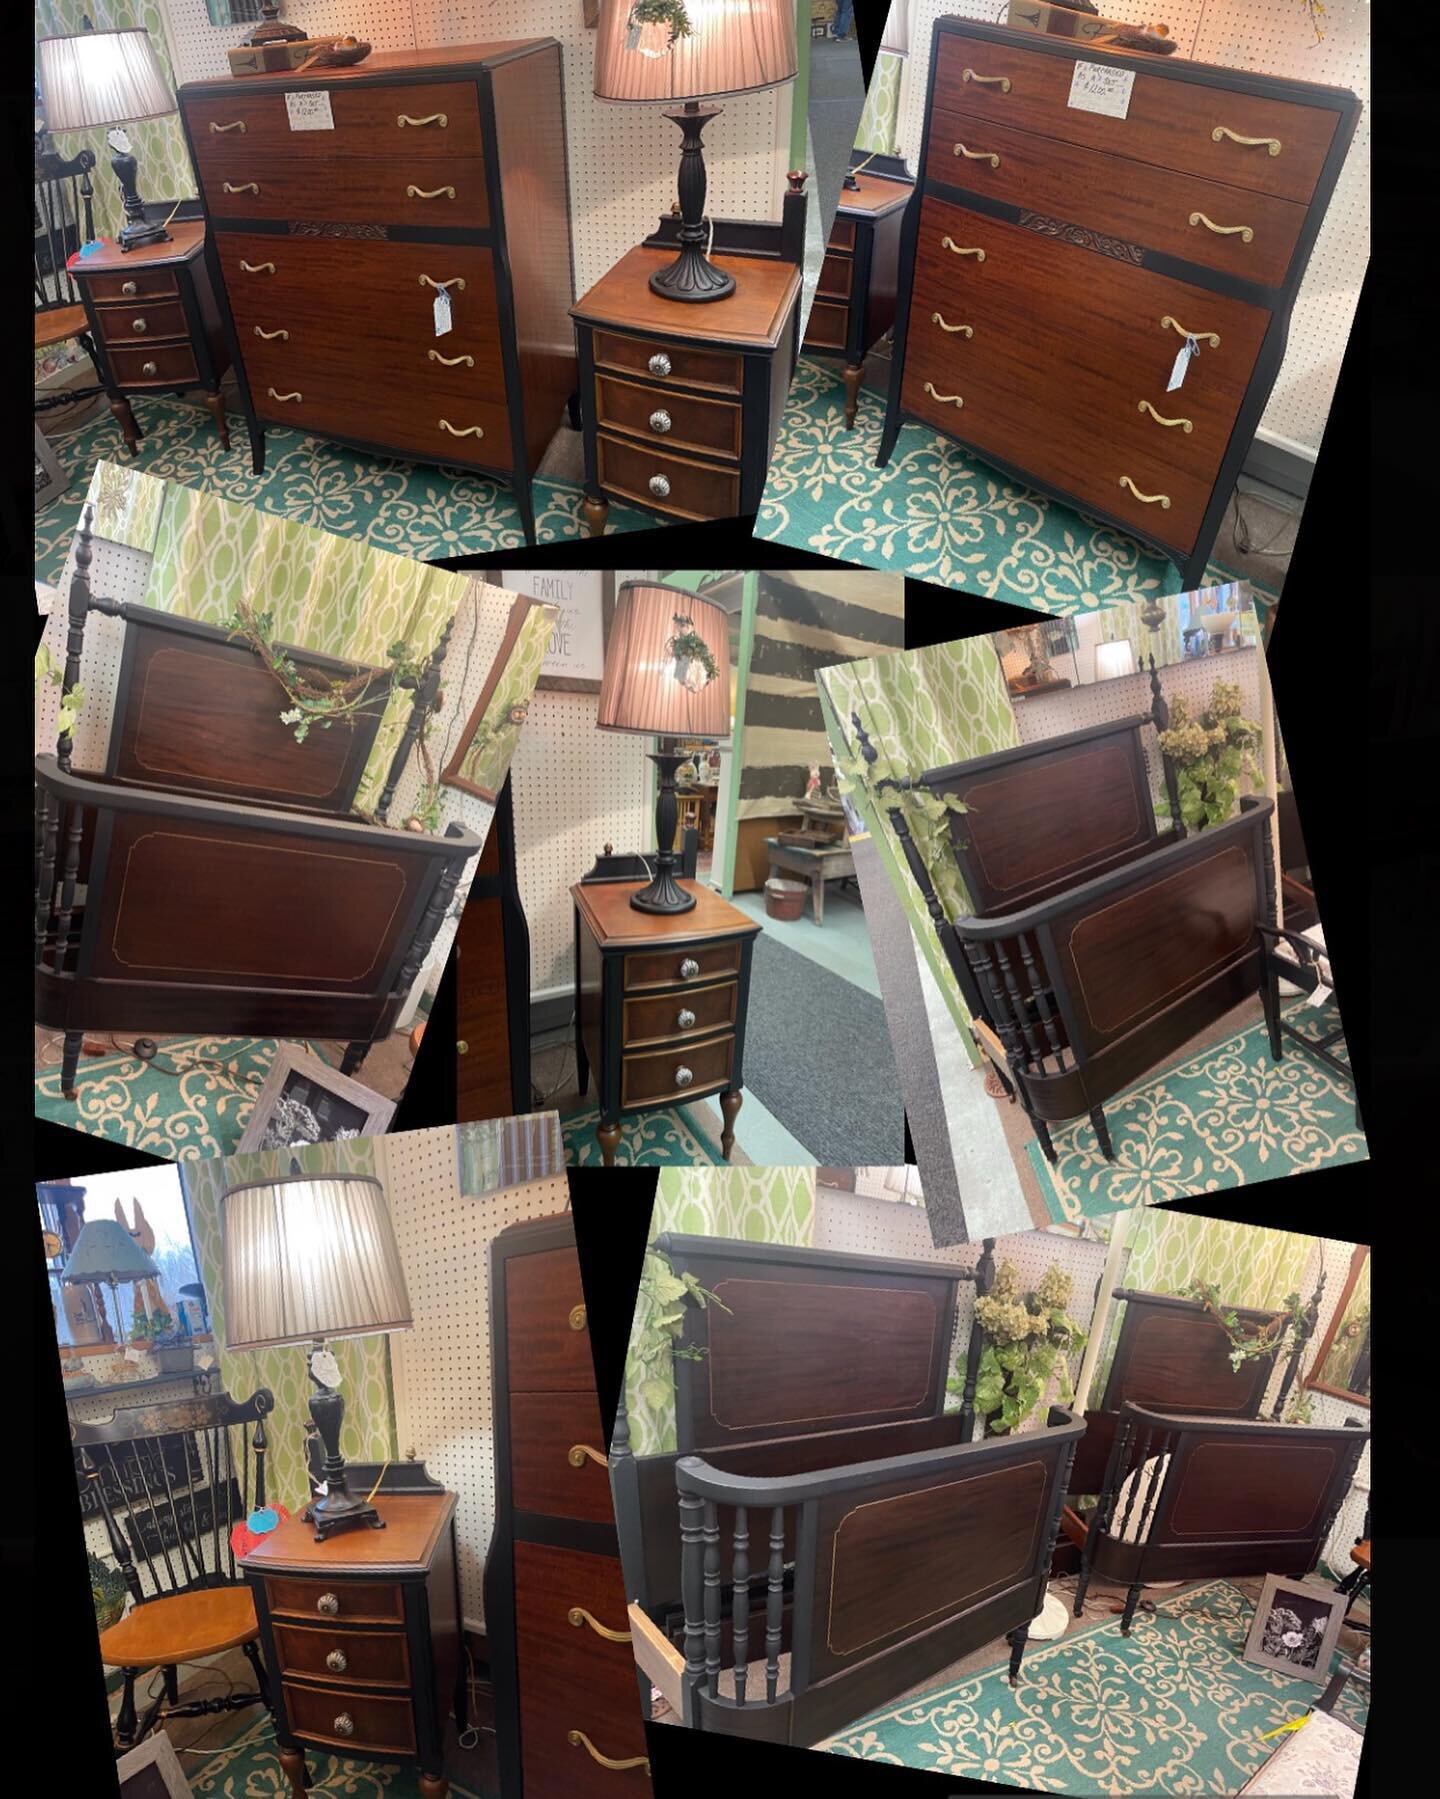 🚨🚨DEAL OF THE WEEK🚨🚨
This bedroom set includes 2 twin size beds, 2 bedside tables, 2 lamps, and a dresser! All for $1200!!! All hand painted, restored, beautiful, solid furniture. Get it before it&rsquo;s gone!